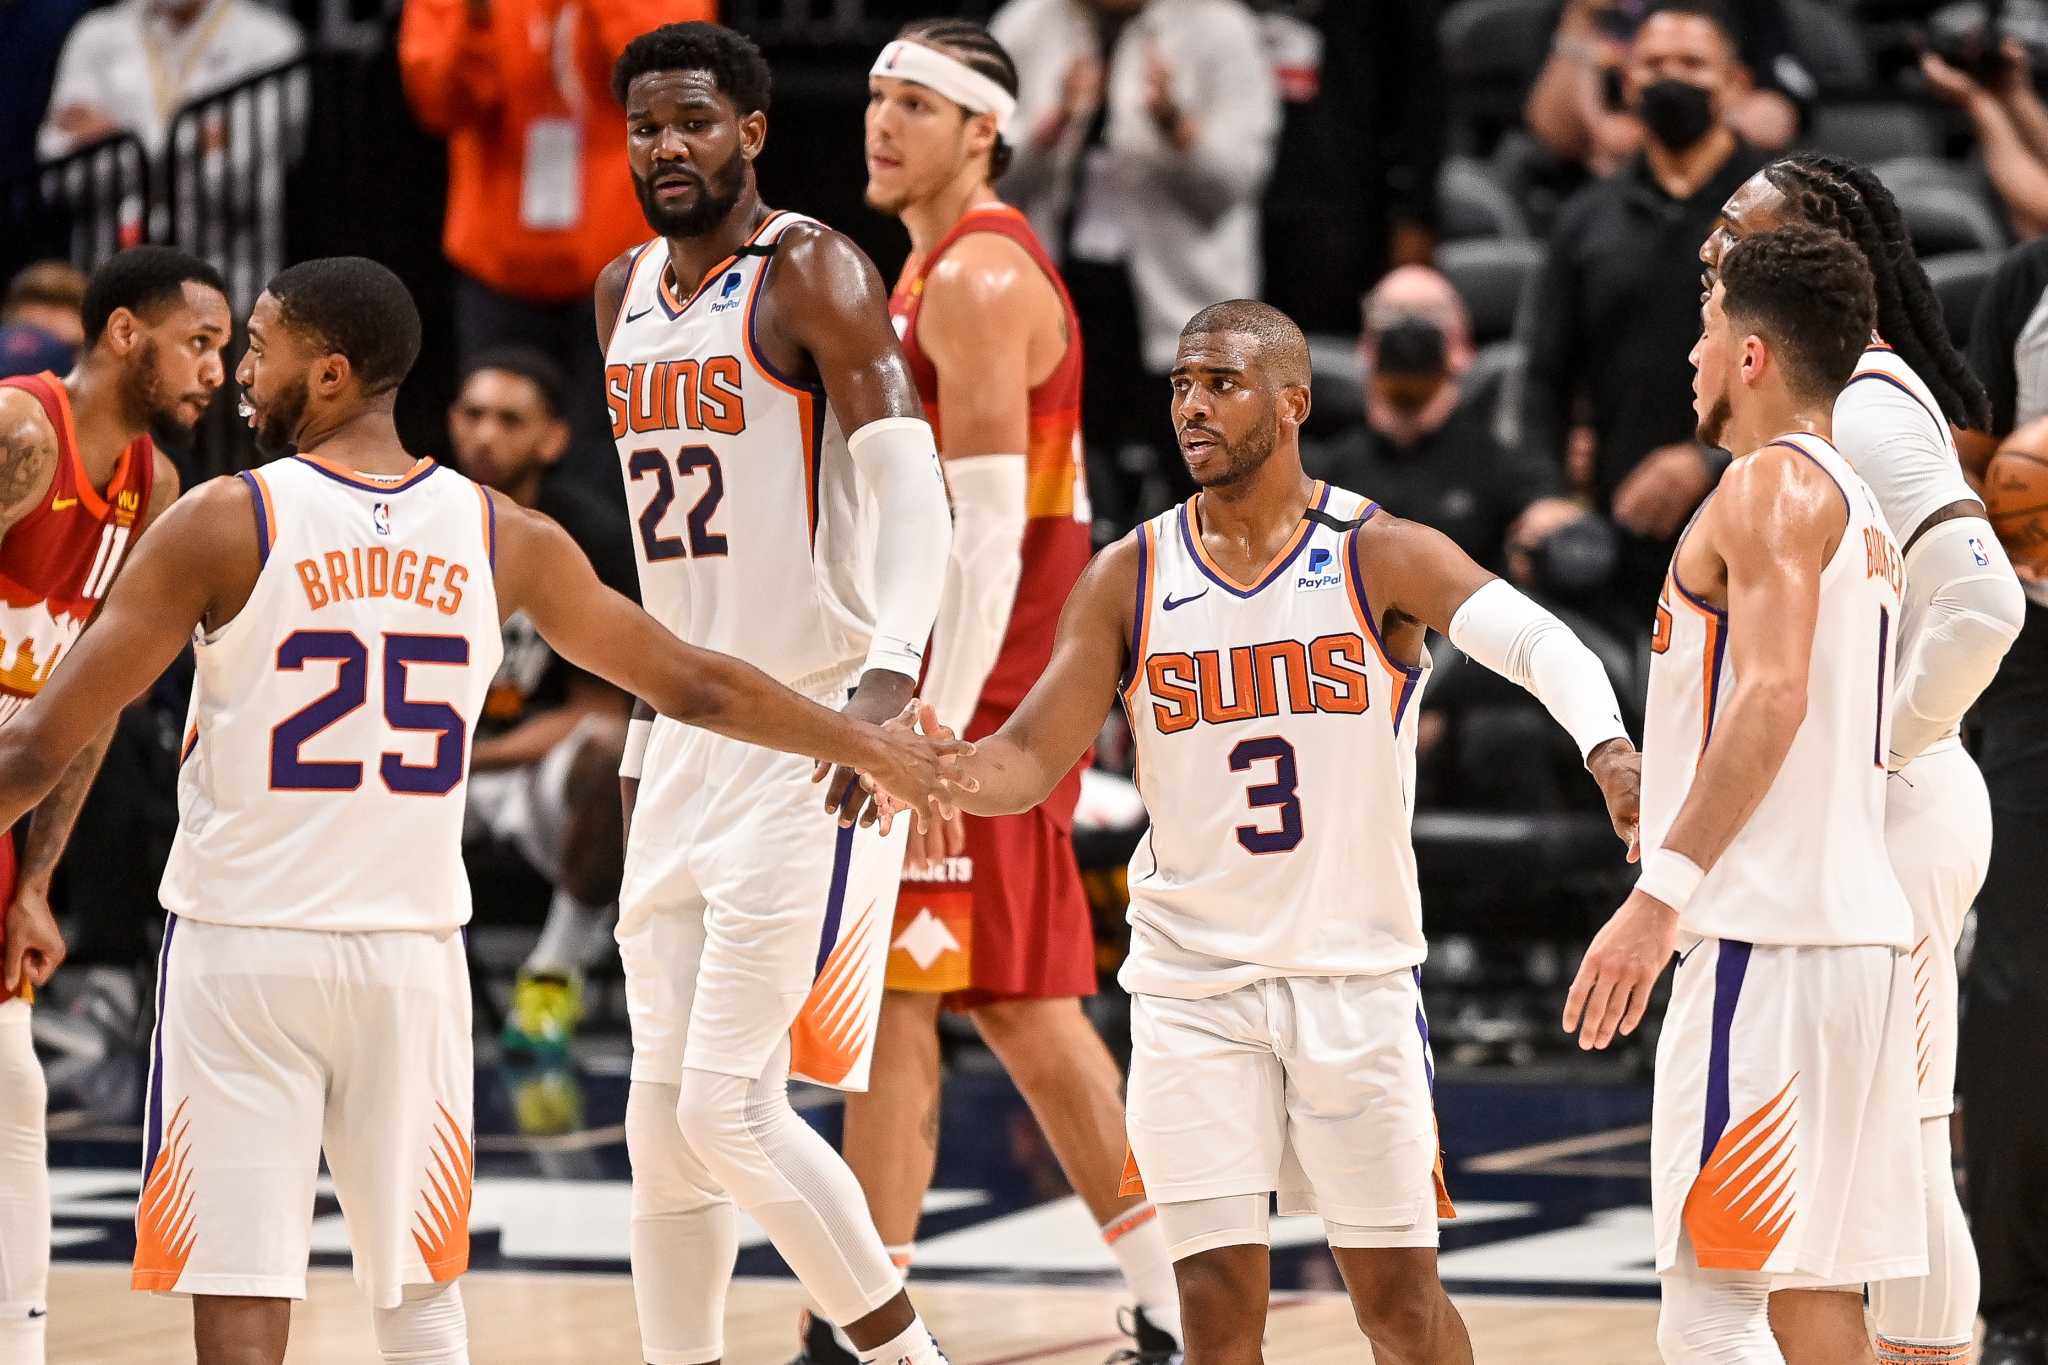 THEY DID IT: Phoenix Suns advance to the NBA Finals for first time since  1993